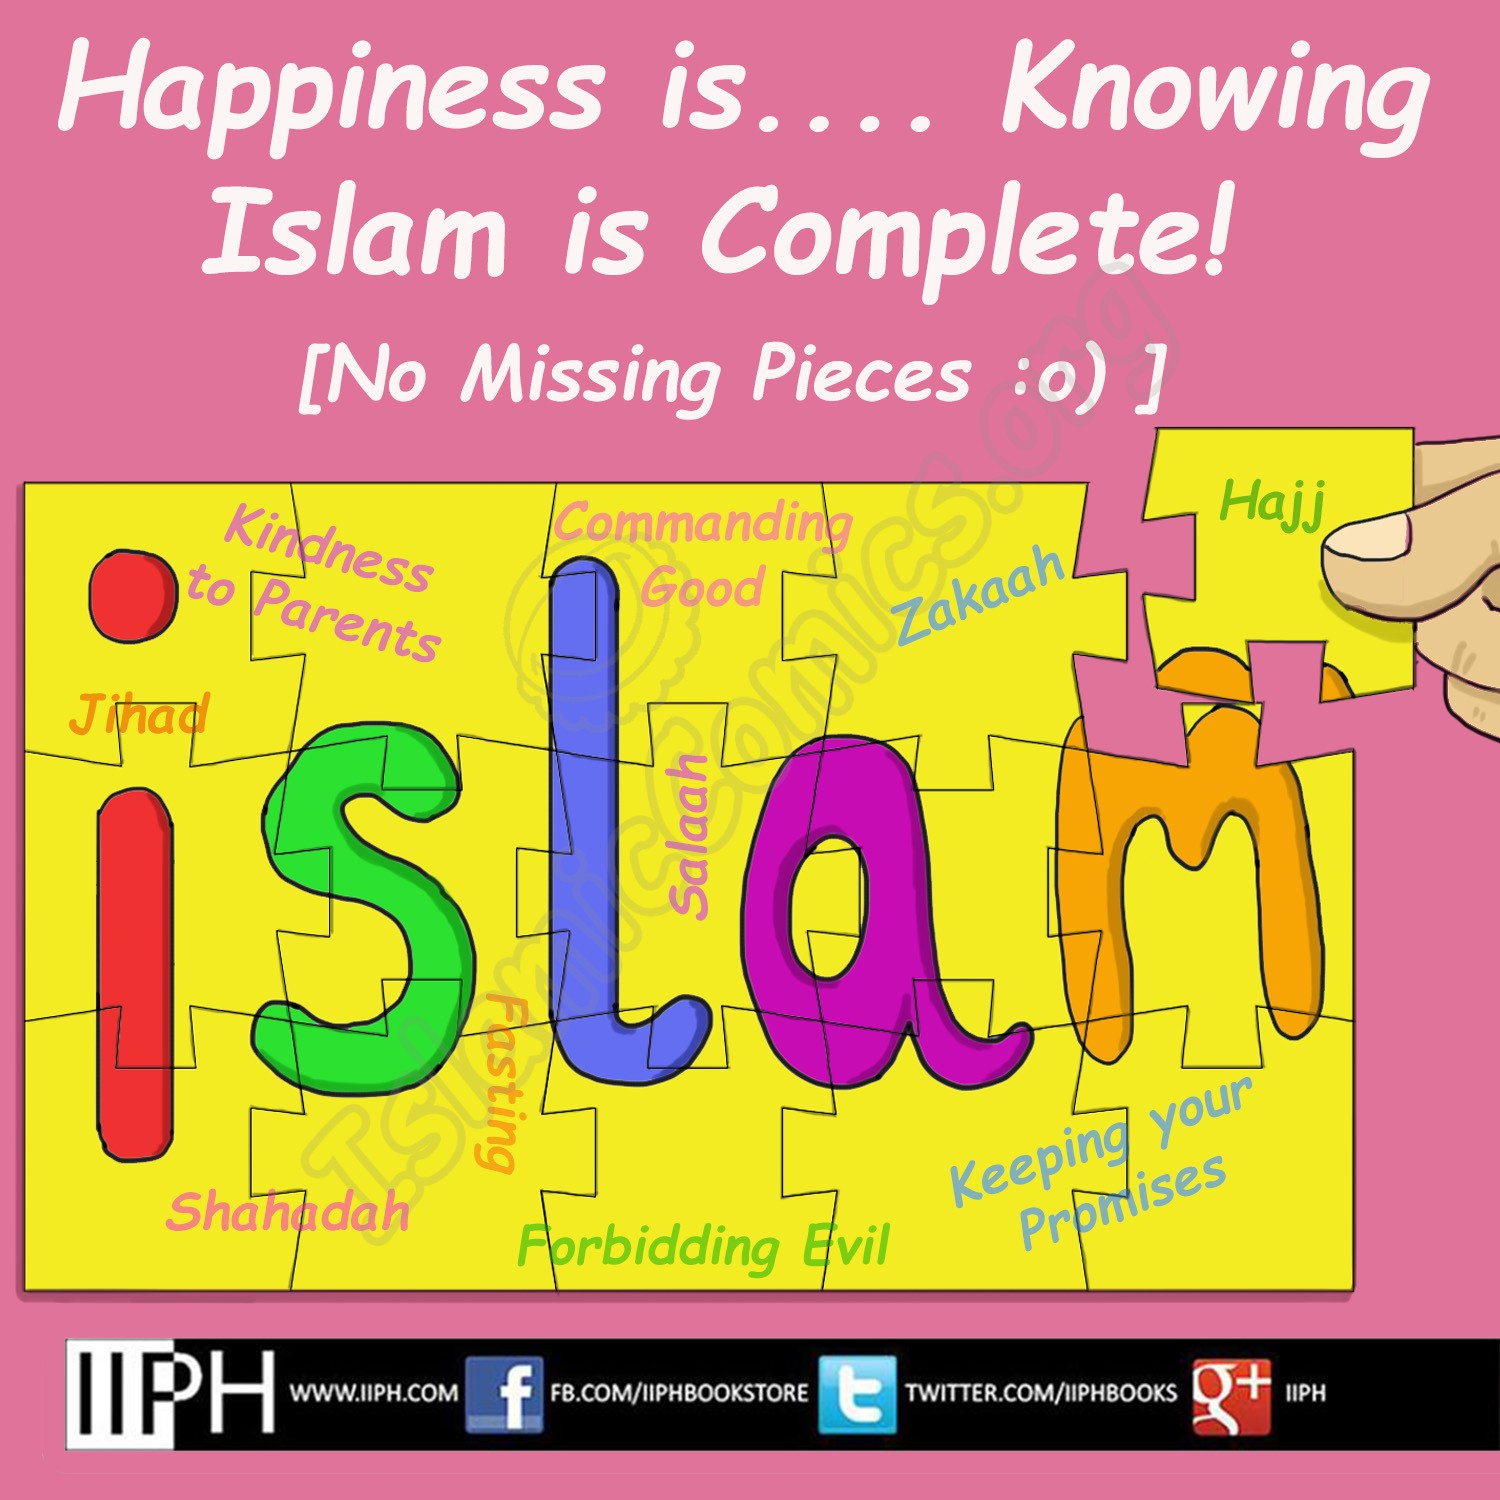 Happiness-is-Islam-is-Complete